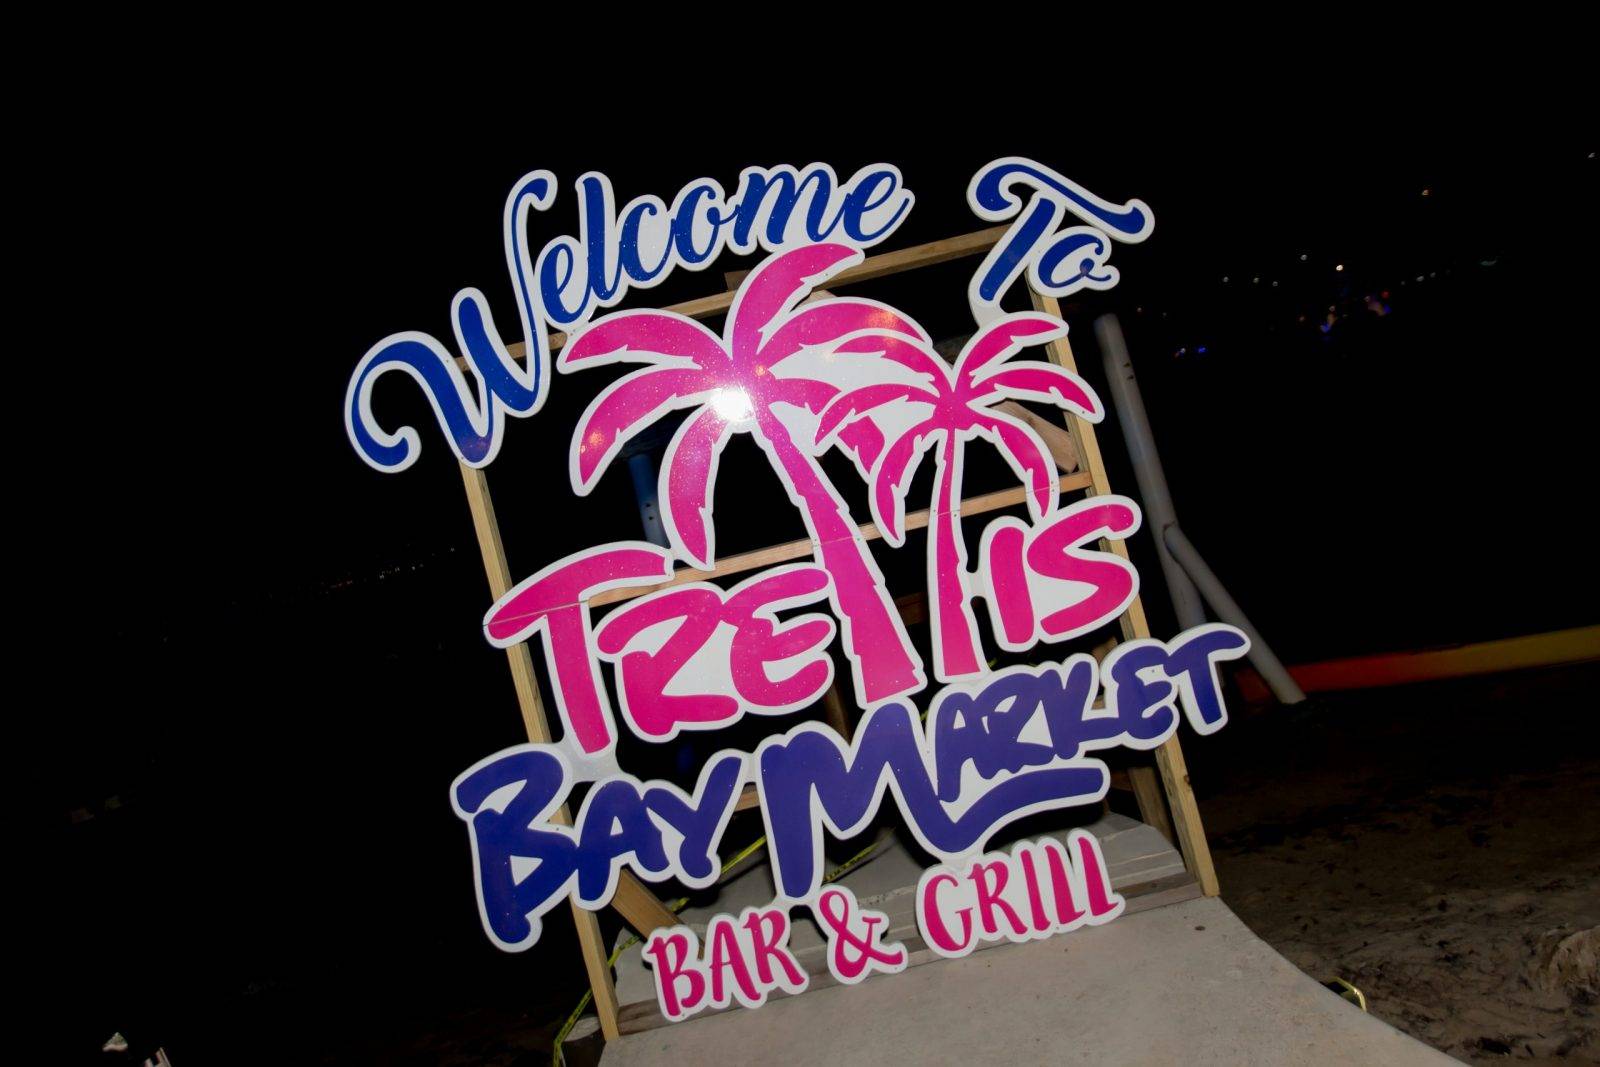 A welcome sign to the Trellis Bay Market Bar & Grill